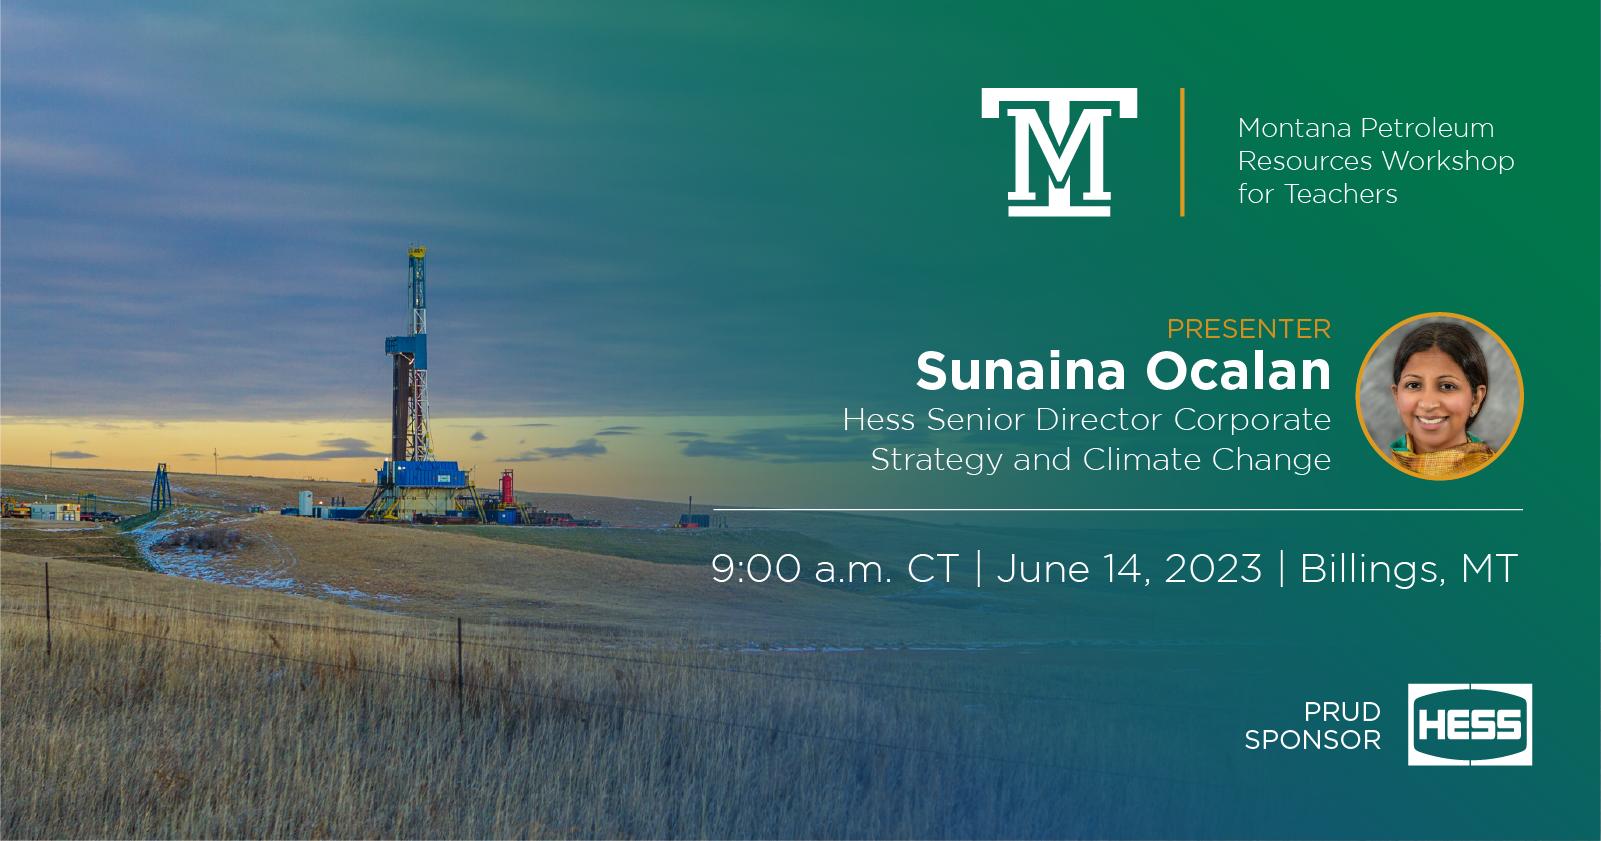 Sunaina Ocalan and Neil Decker to Participate in the Montana Petroleum Resources Workshop